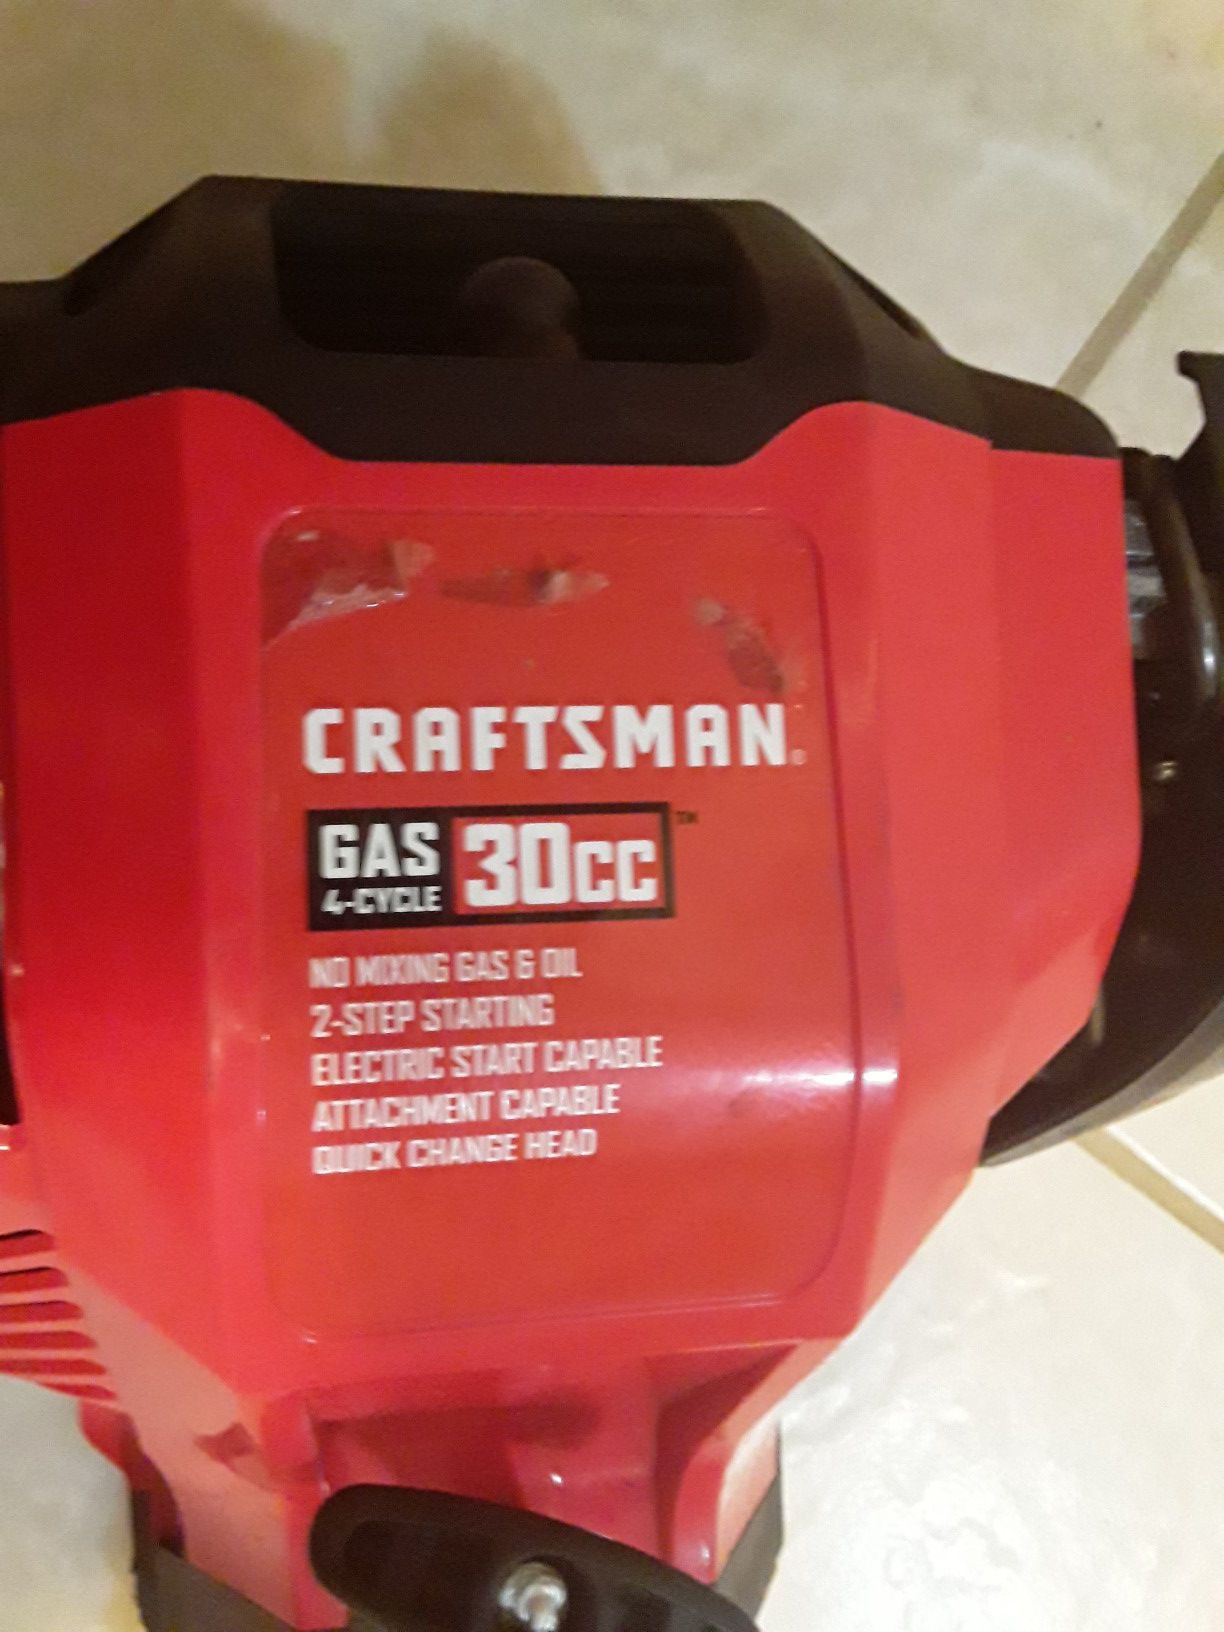 Craftsman weedeater gas 4 cycle 30cc